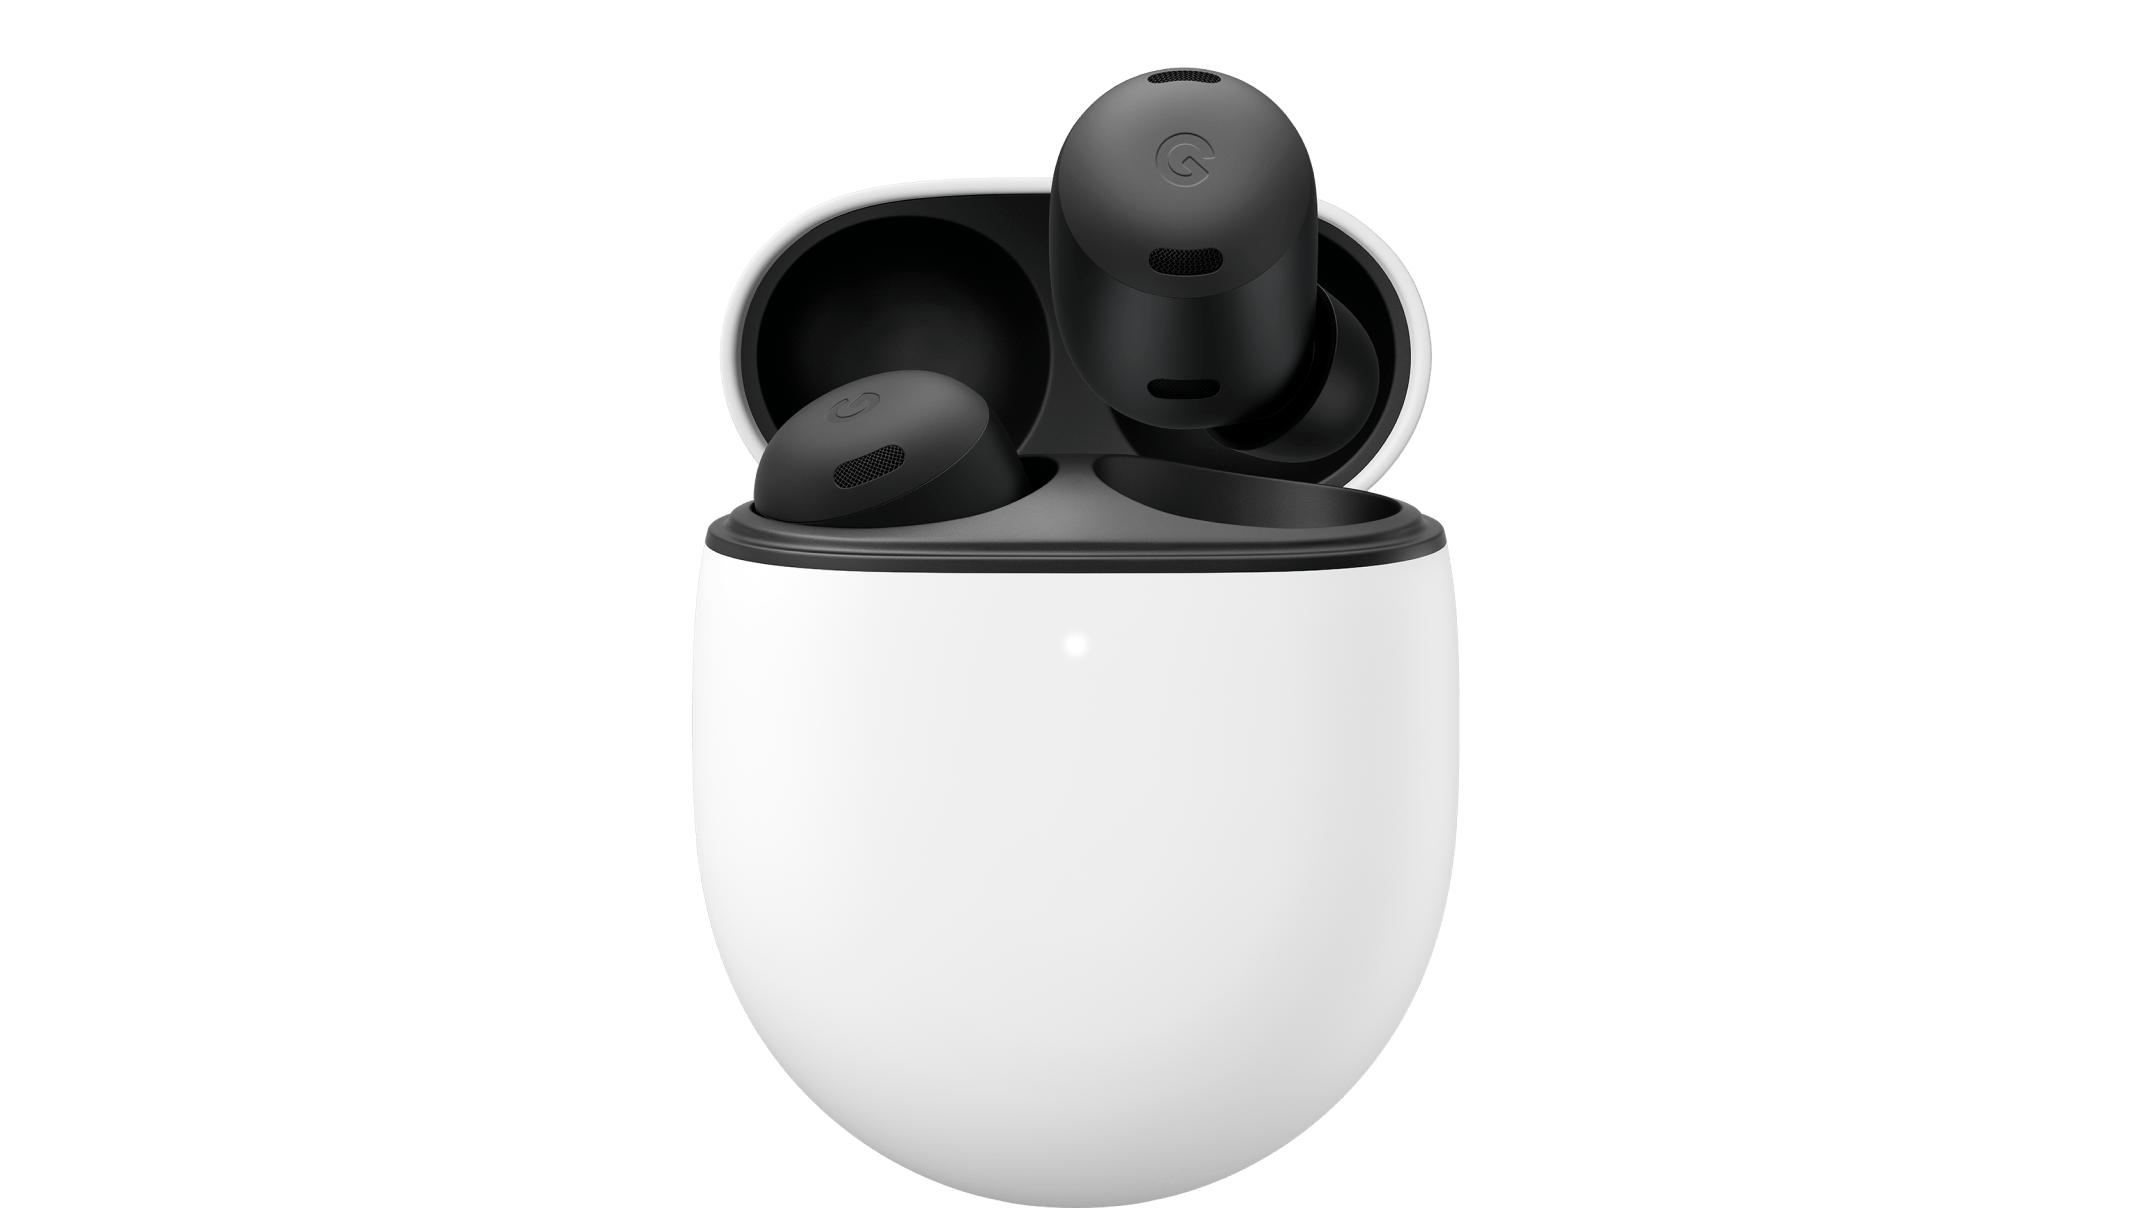 Google Pixel Buds Pro in Charcoal